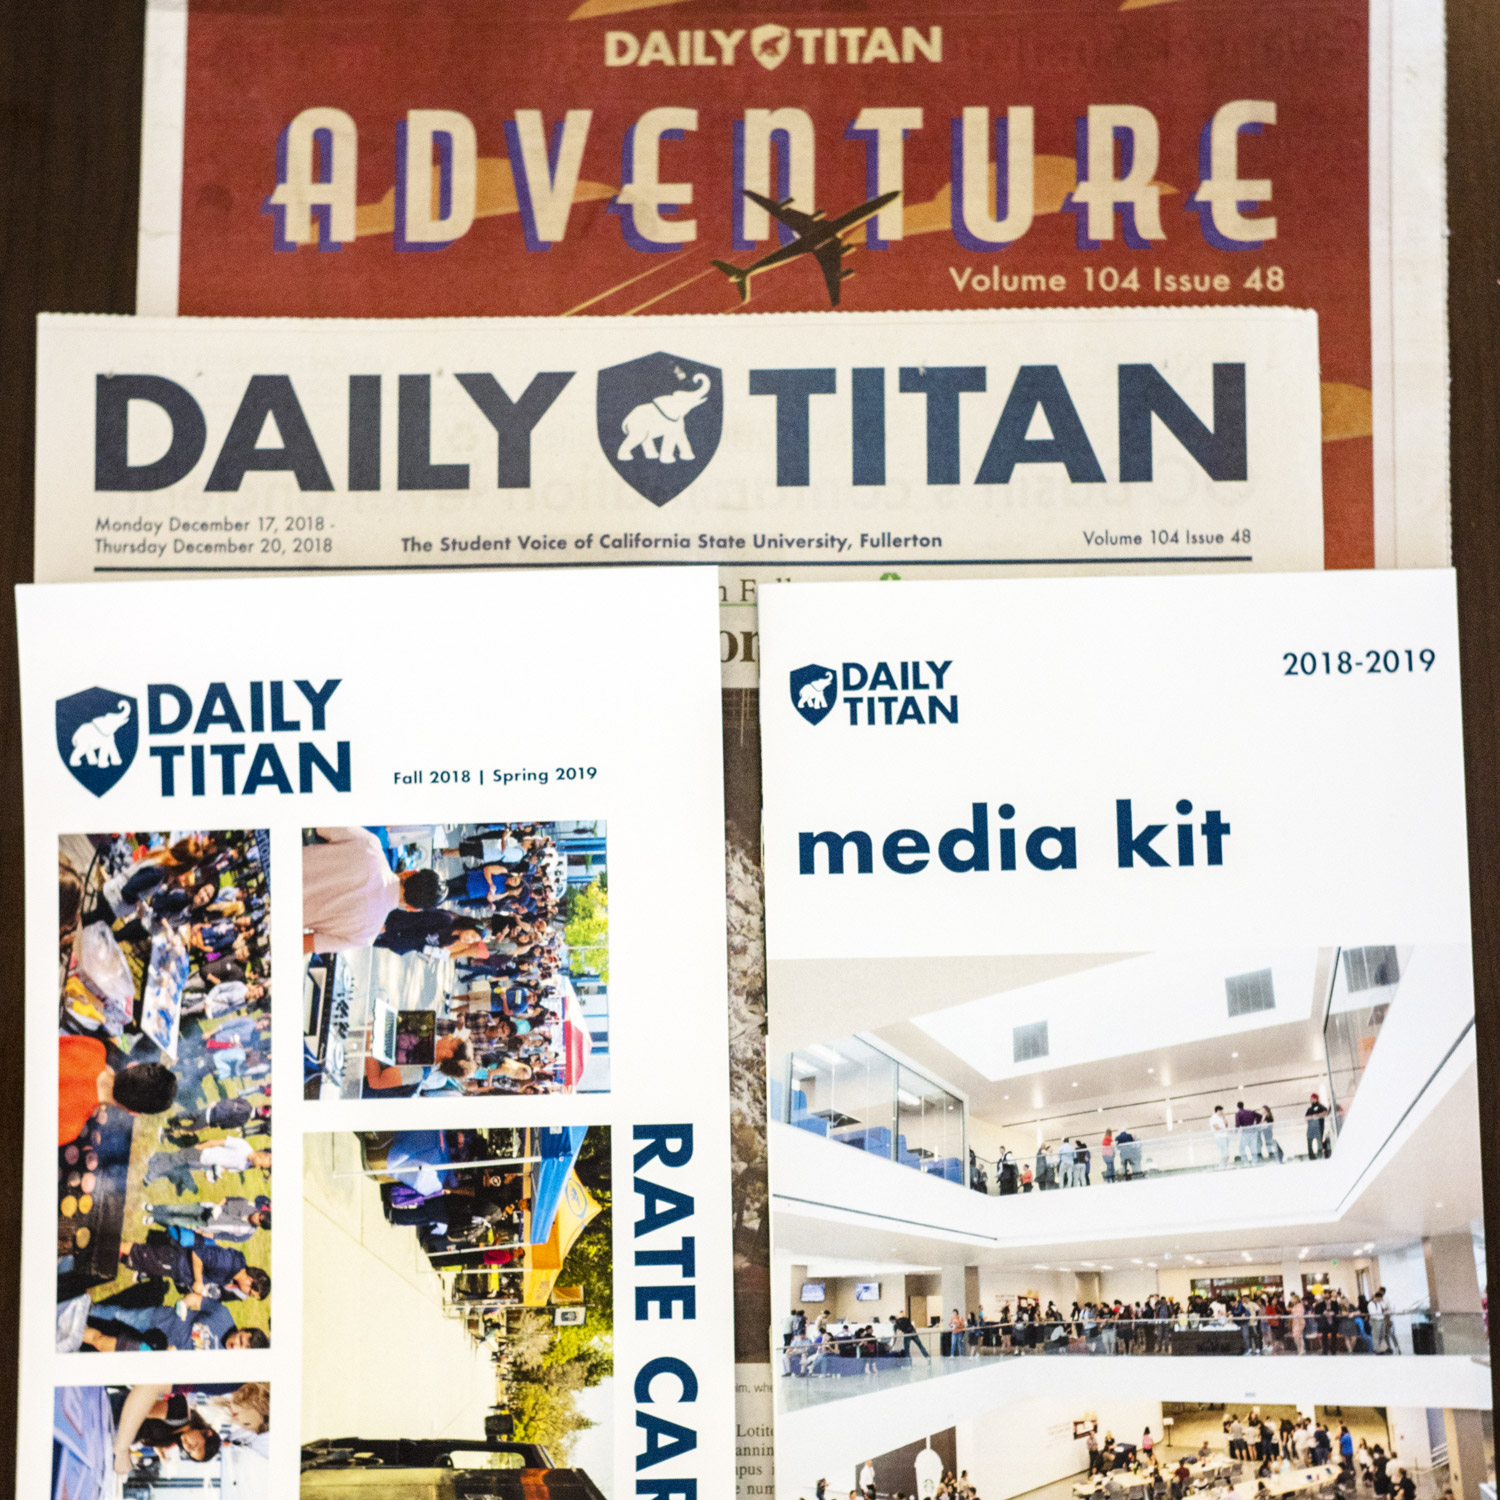 New Daily Titan logo on rate card, media kit, daily newspaper, and special publication.